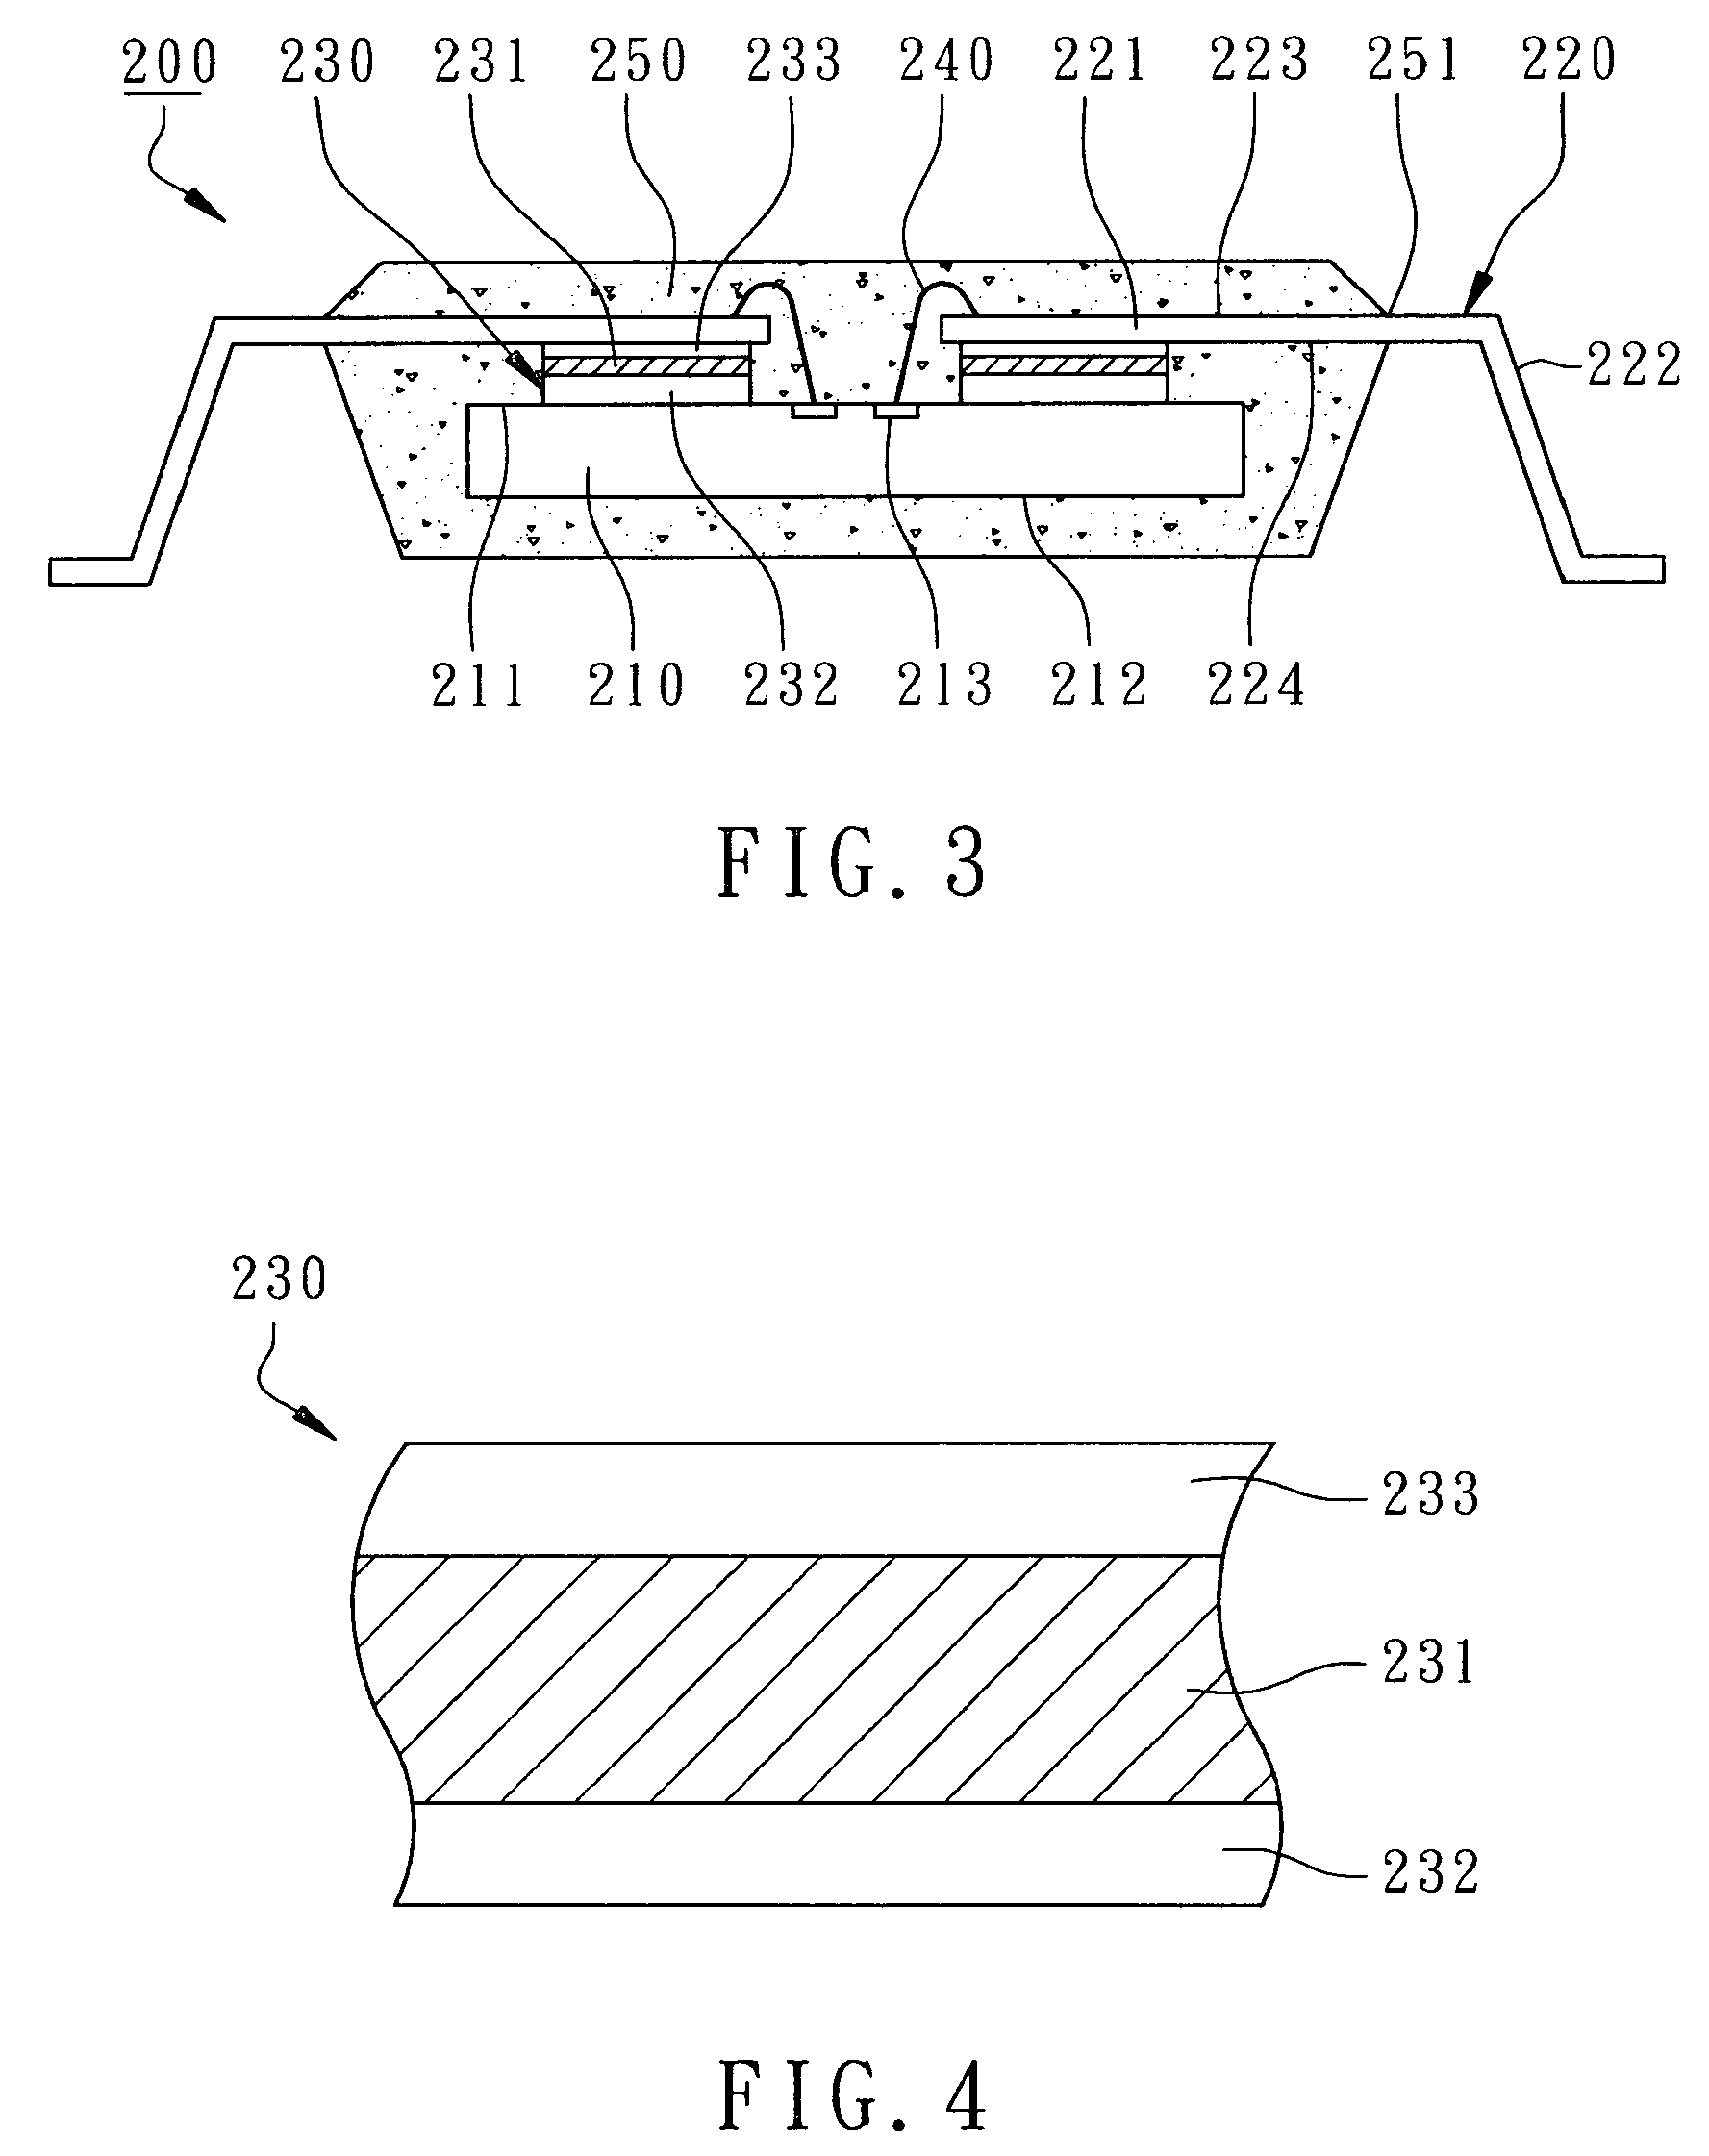 Leadframe-based semiconductor package